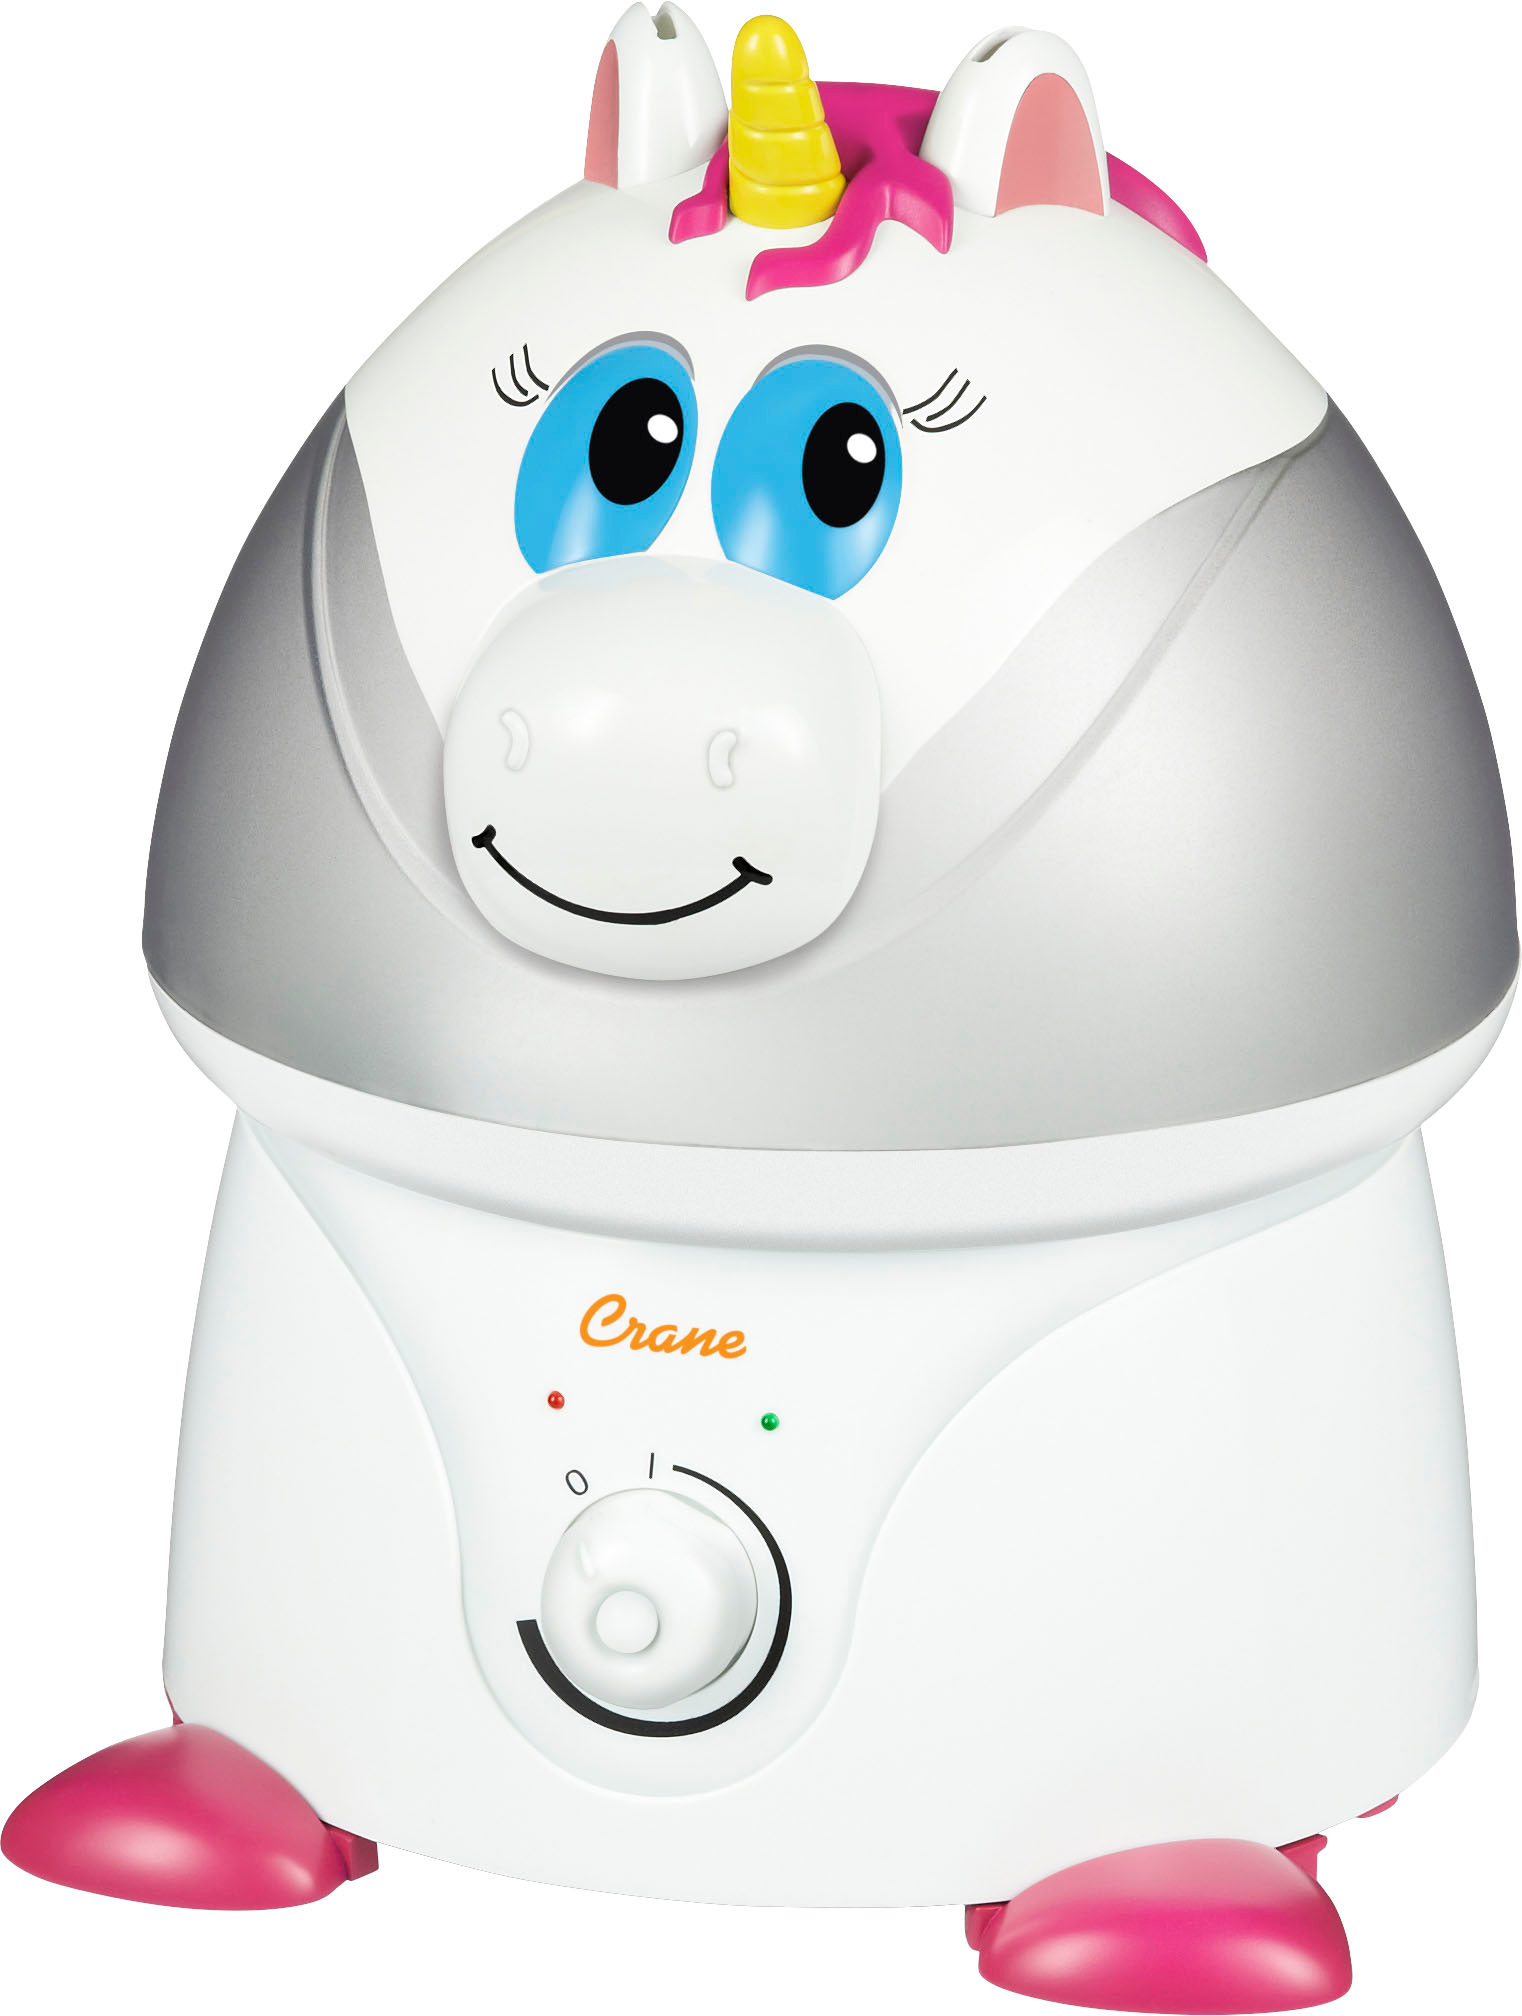 Angle View: CRANE - 1 Gal. Adorable Ultrasonic Cool Mist Humidifier for Medium to Large Rooms up to 500 sq. ft. - Unicorn - White/Pink